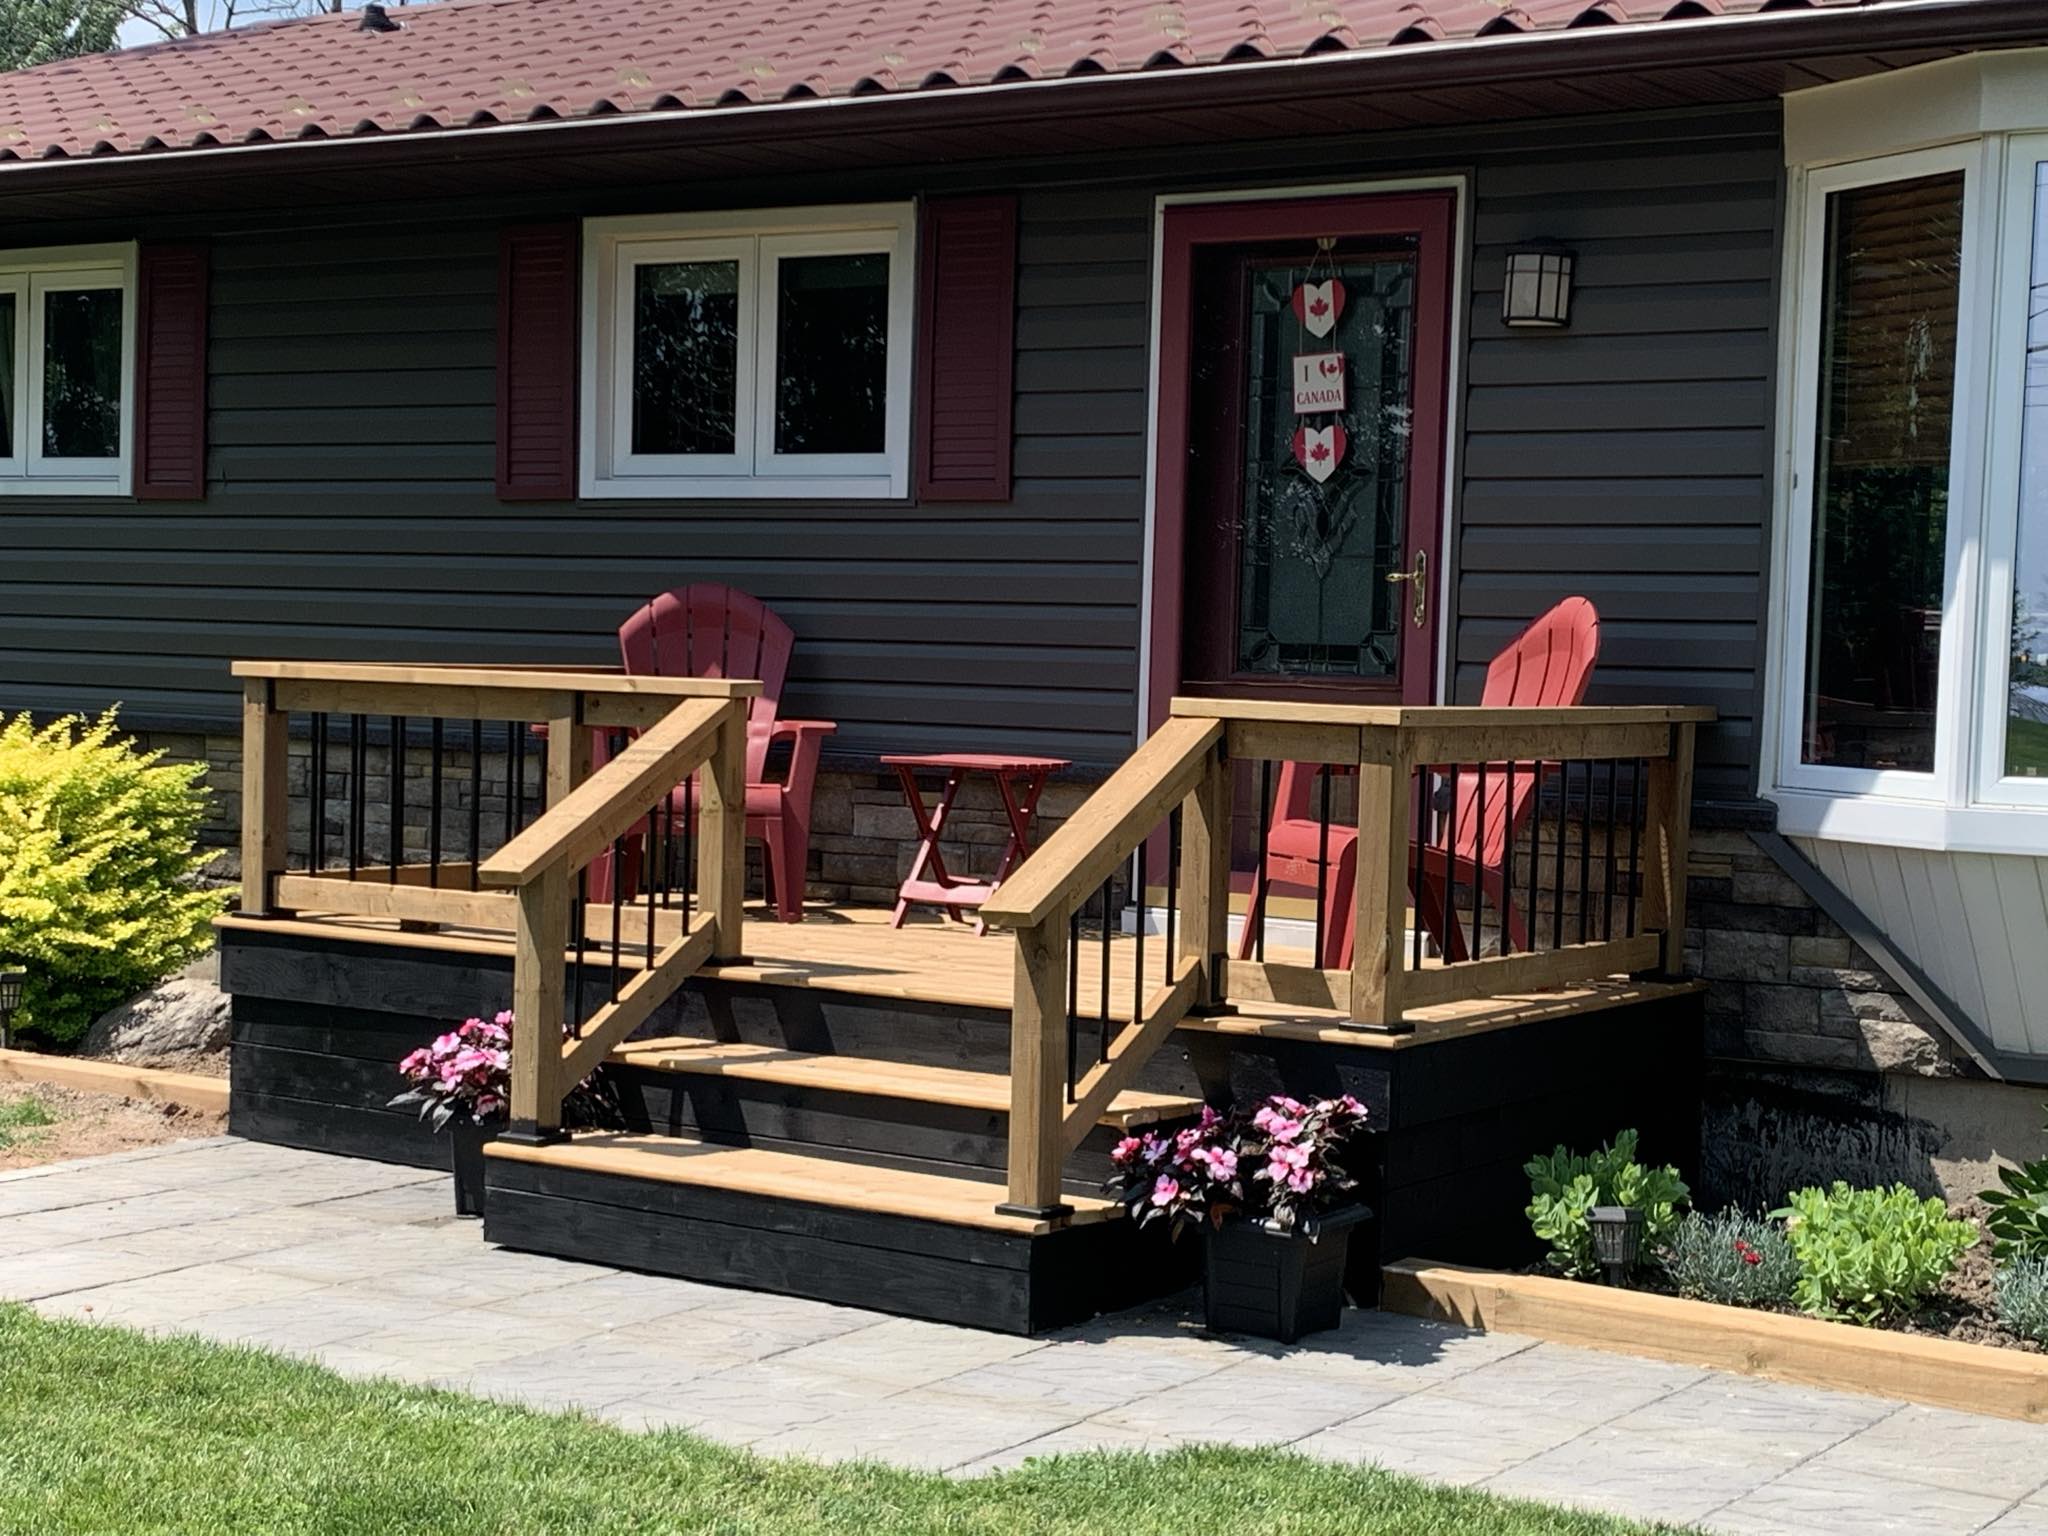 Pressure treated deck with aluminum pickets